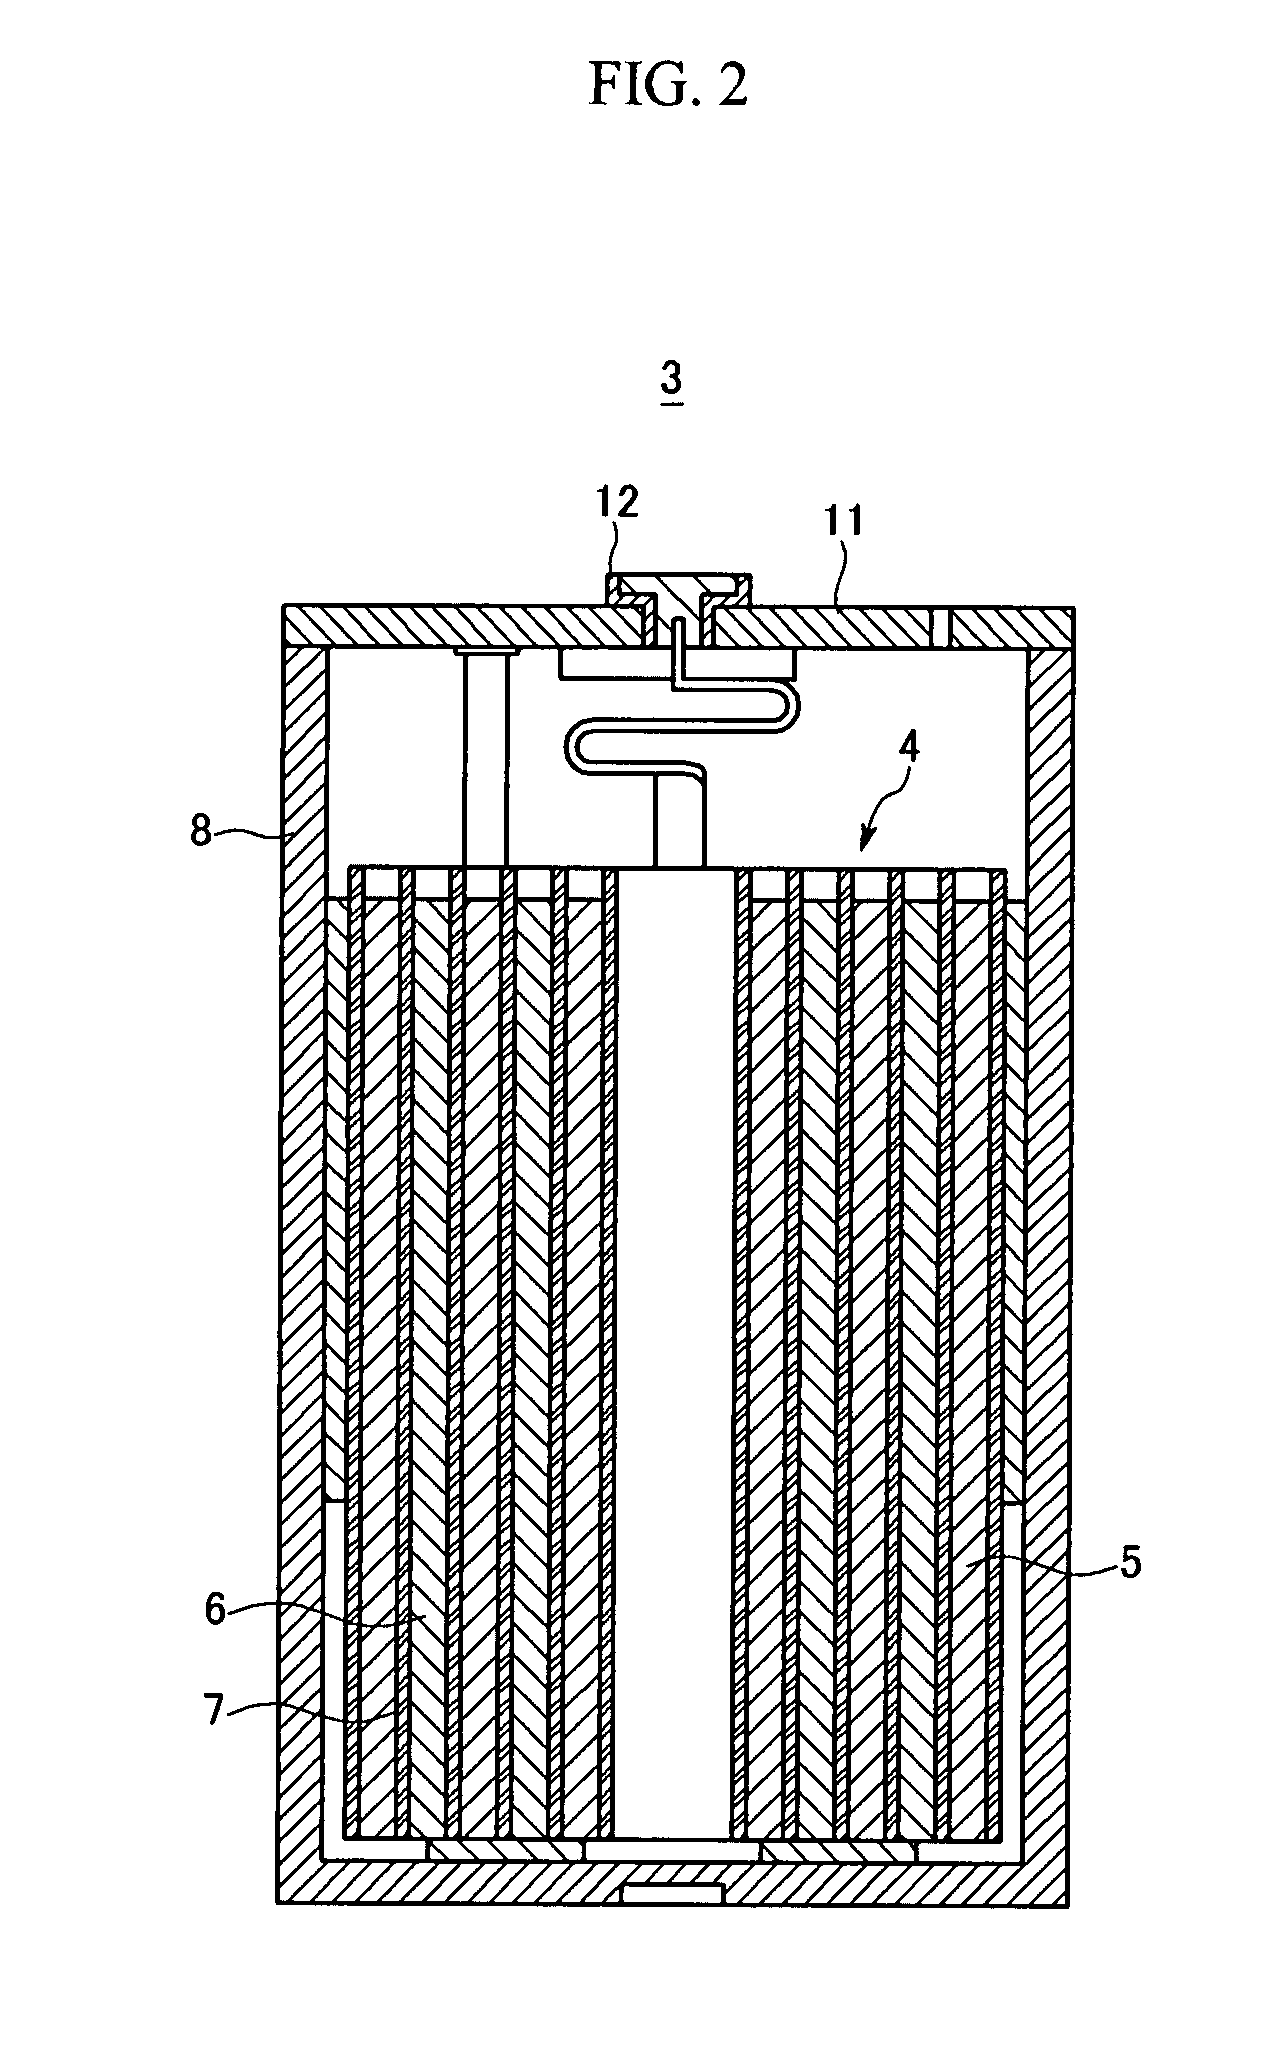 Negative active material for rechargeable lithium battery, method of preparing thereof, and rechargeable lithium battery including the same